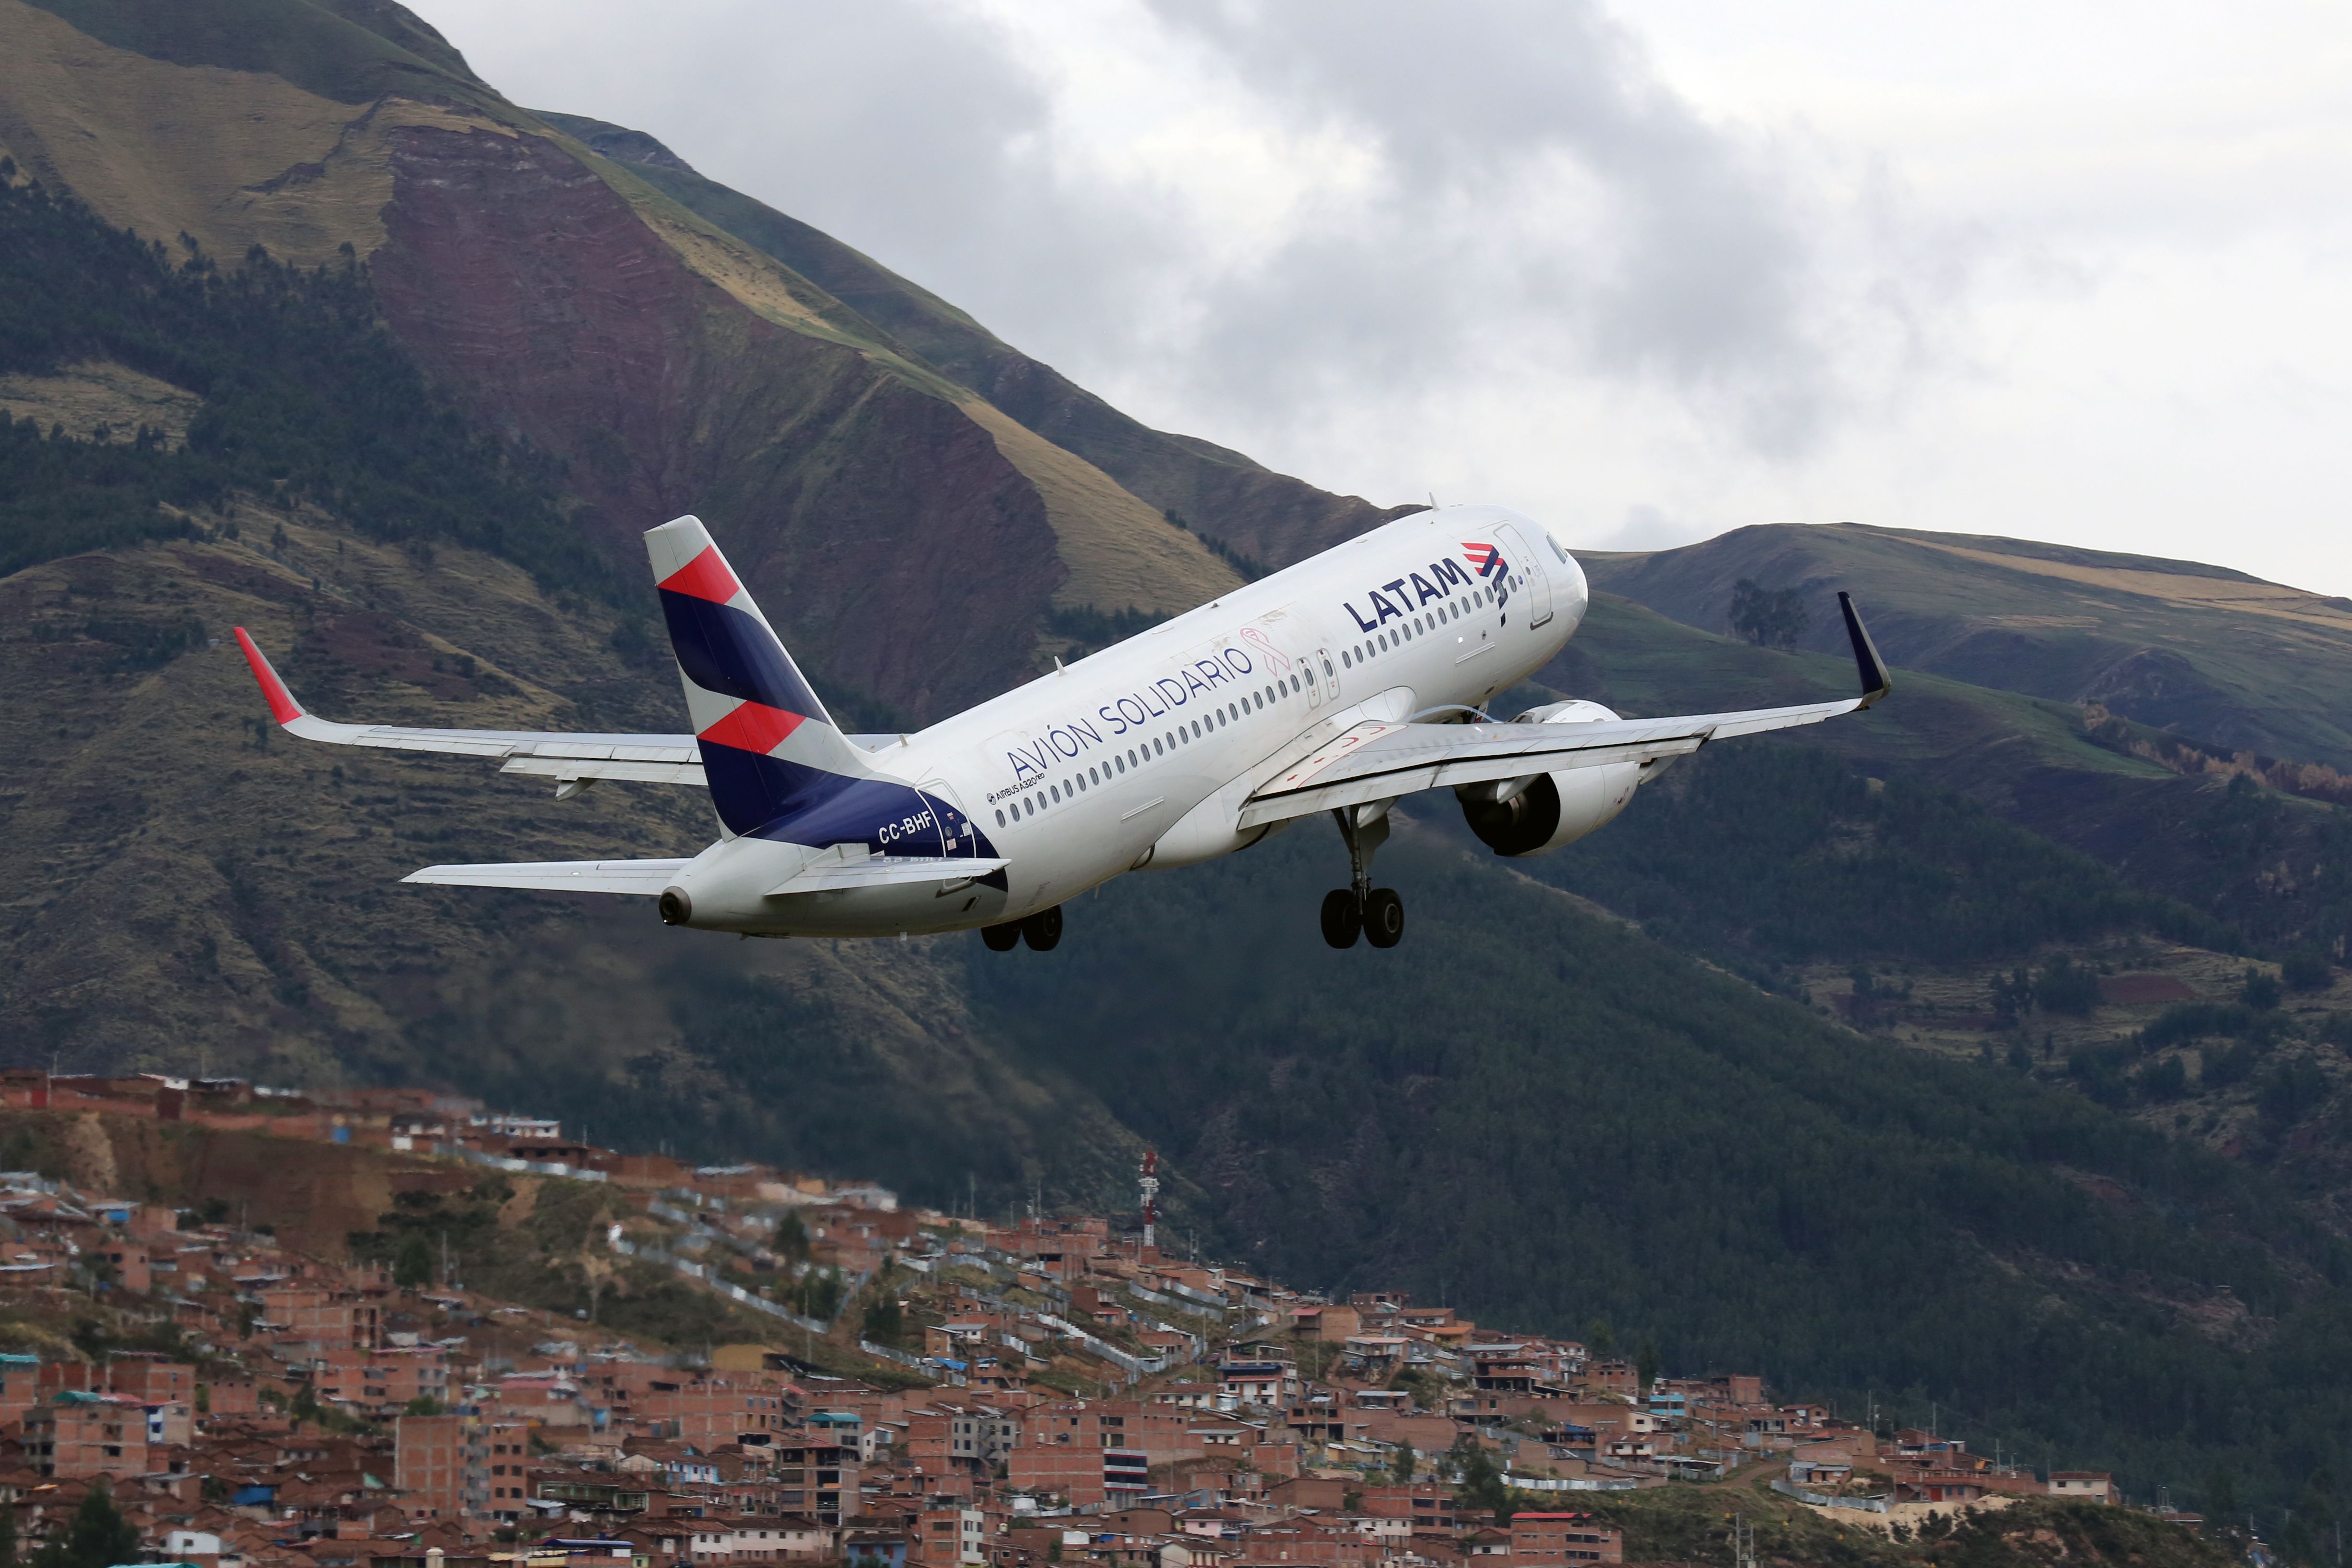 LATAM Peru Airbus A320 NEO taking off from Cusco Airport